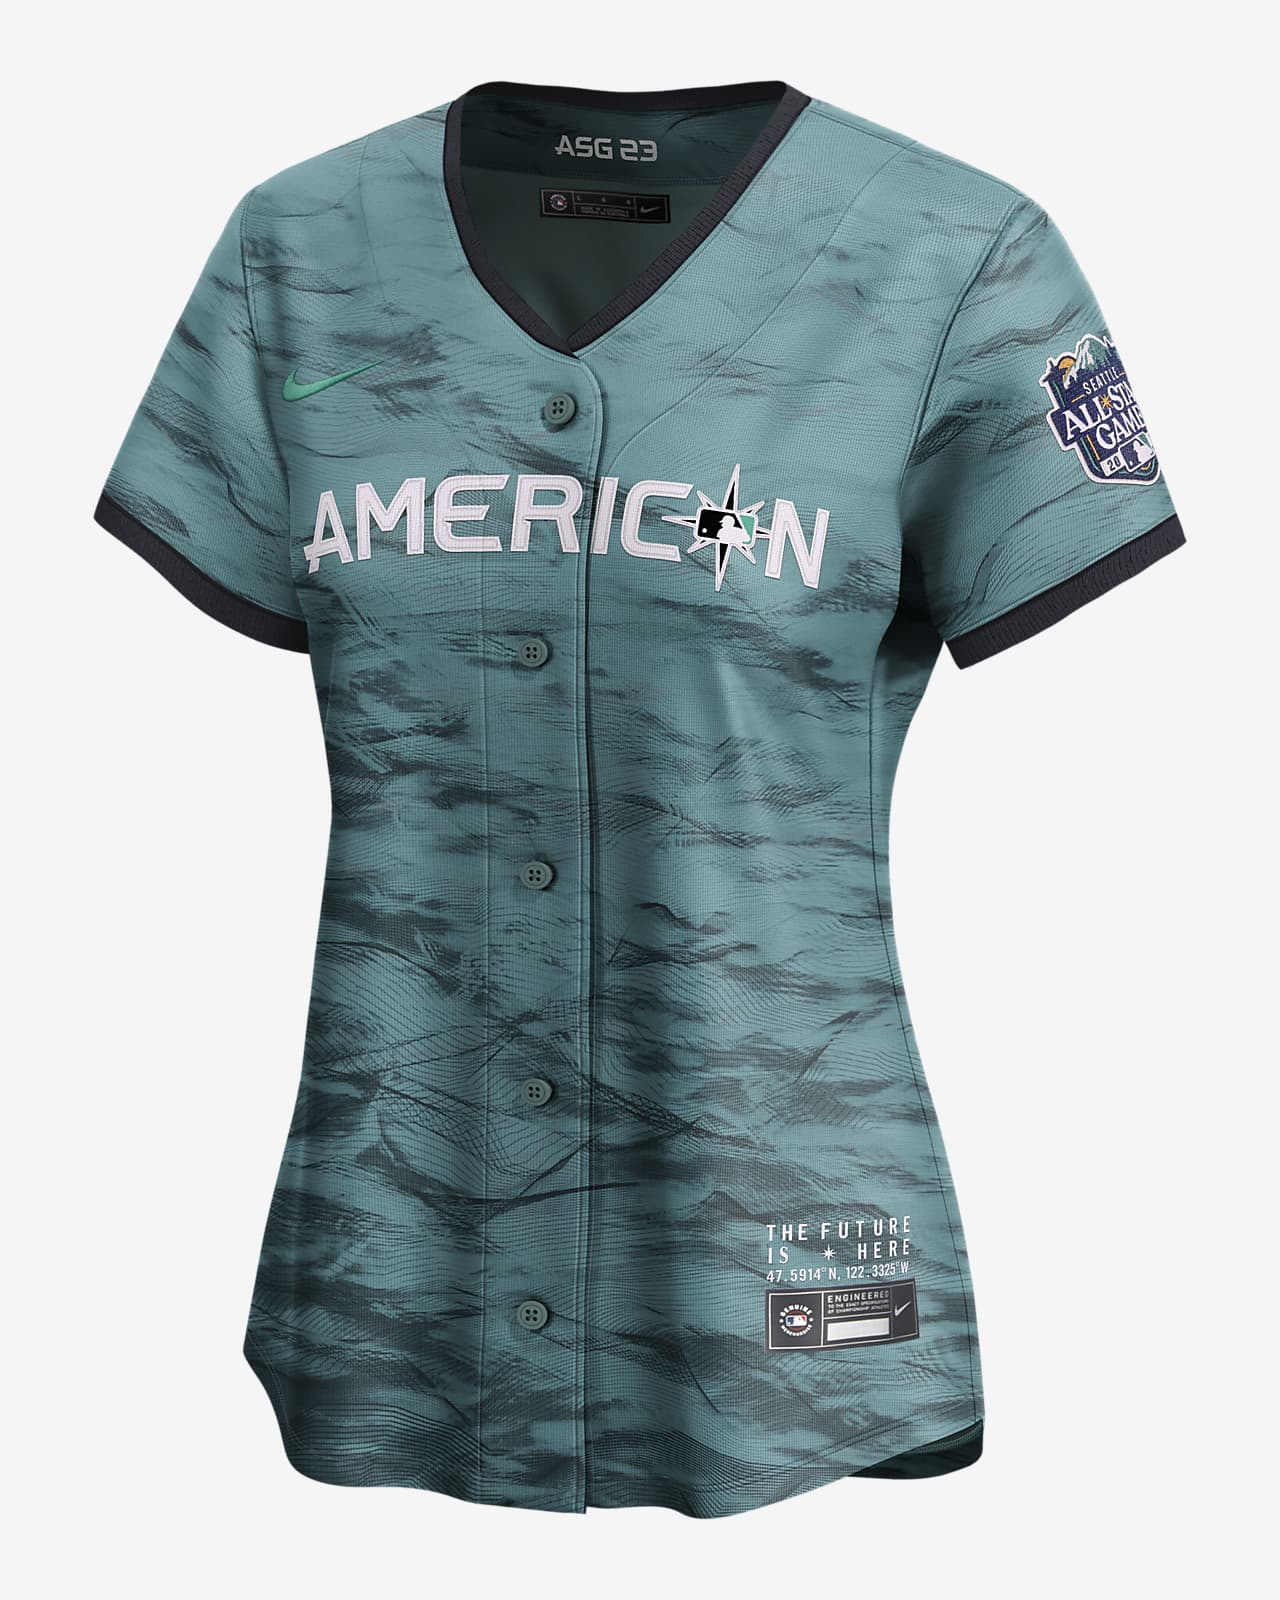 seattle mariners all star jersey